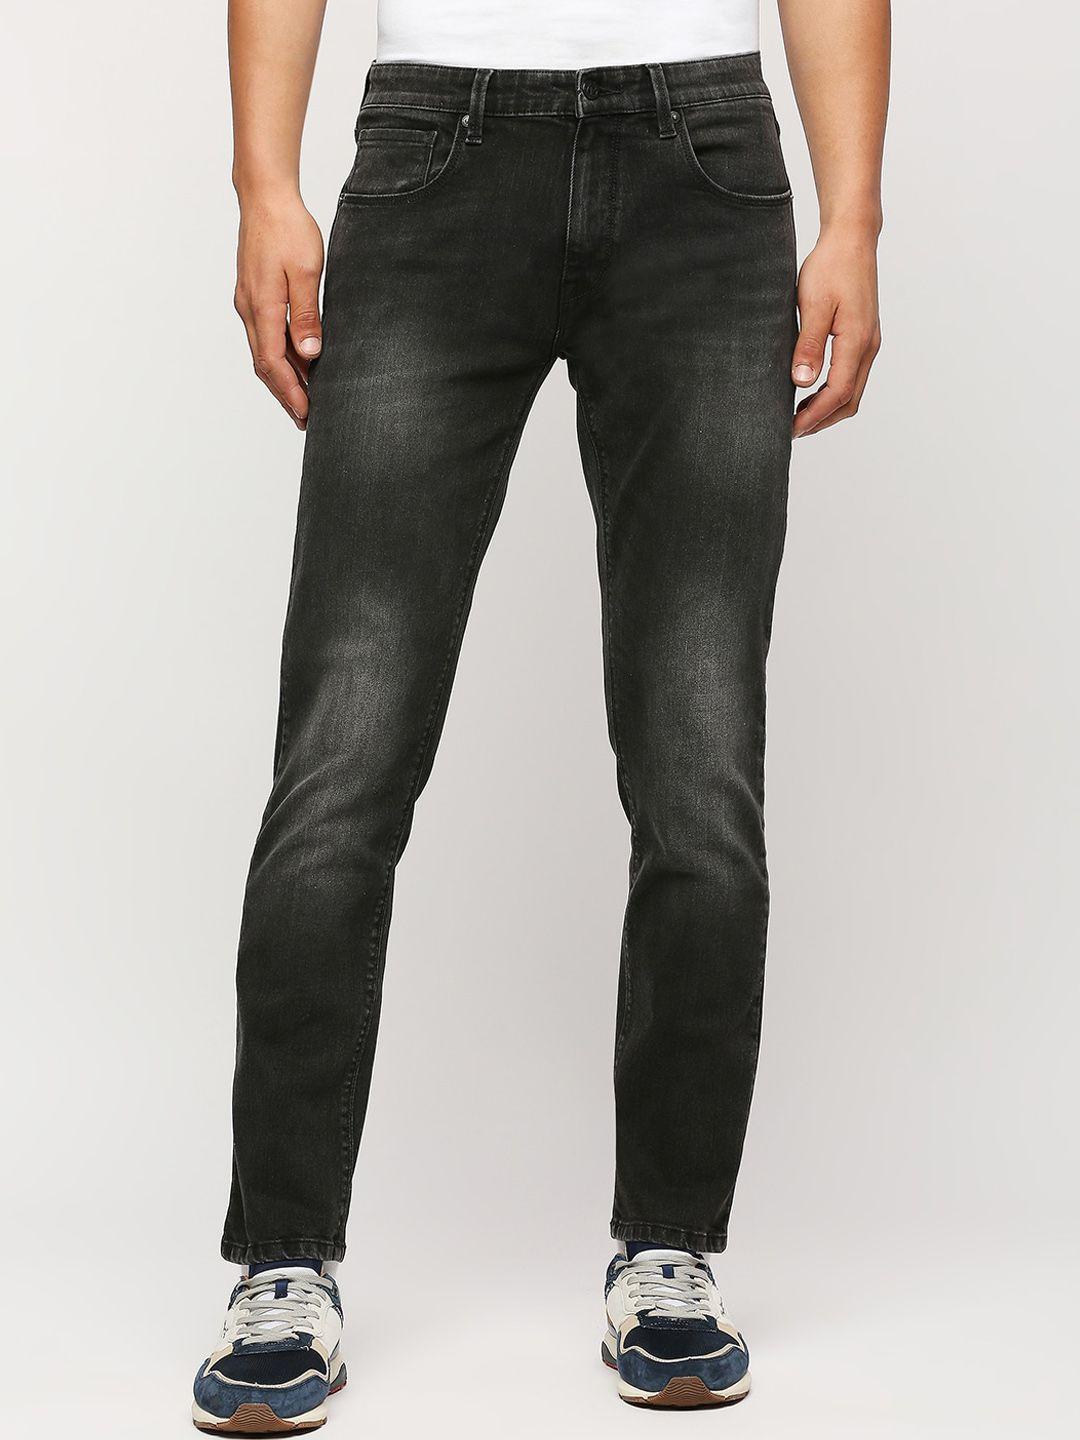 pepe-jeans-men-tapered-fit-low-rise-heavy-fade-cotton-jeans